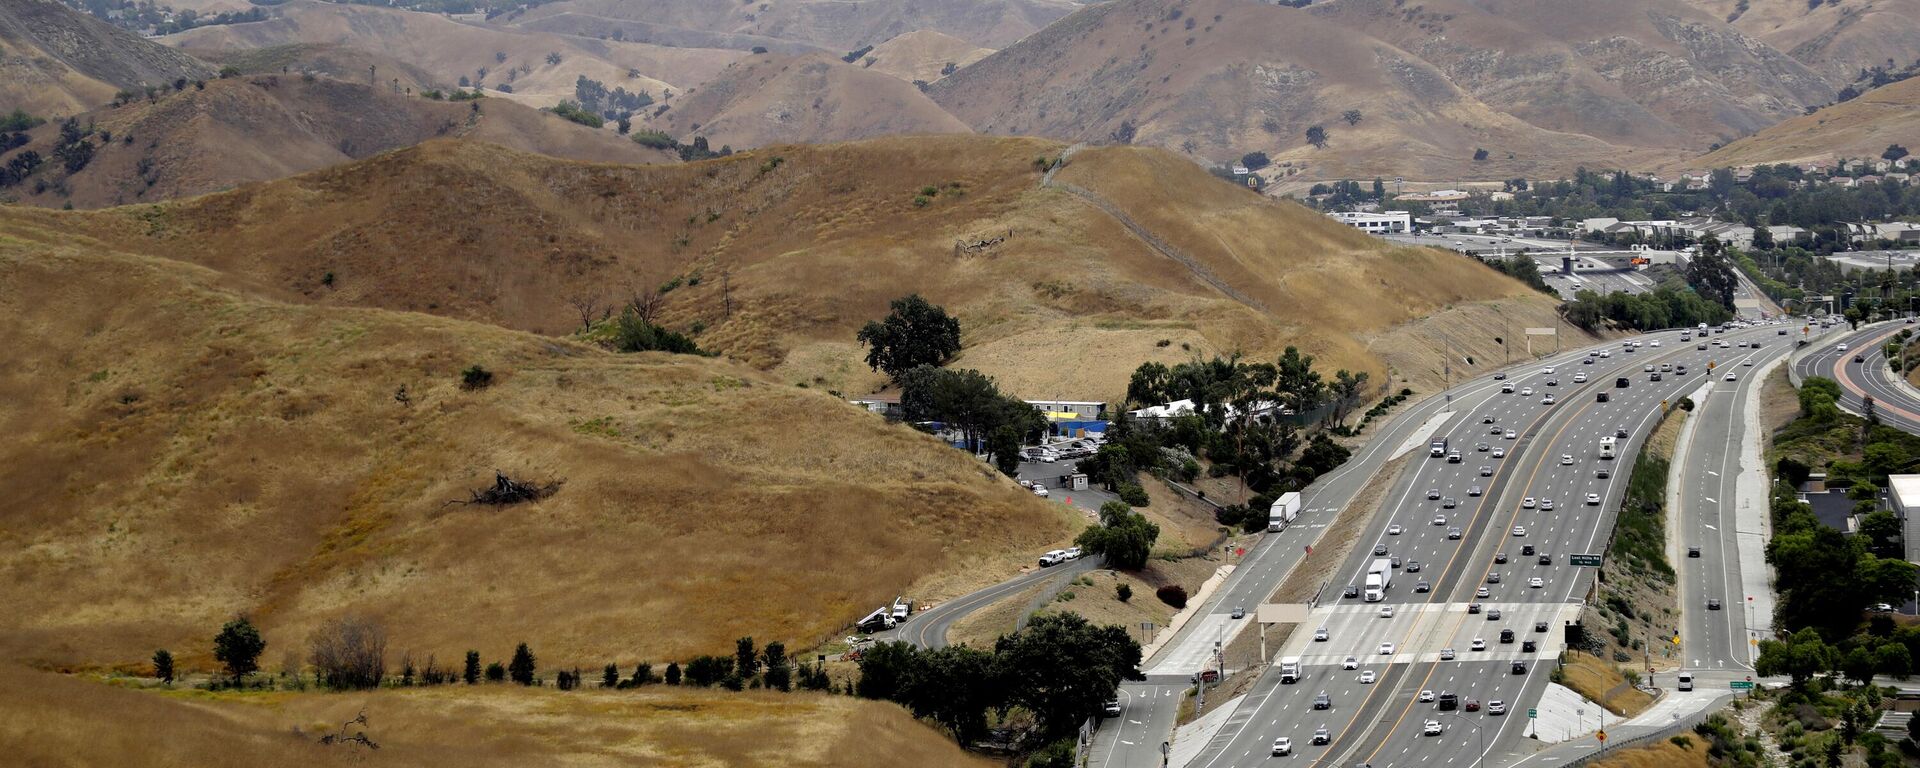 FILE - U.S. Highway 101 passes between two separate open space preserves on conservancy lands in the Santa Monica Mountains in Agoura Hills, Calif., July 25, 2019. Groundbreaking is set for next month on what will be the world's largest wildlife crossing, a bridge over a major Southern California highway that will provide more room to roam for mountain lions and other animals hemmed in by urban sprawl. A ceremony marking the start of construction for the span over U.S. 101 near Los Angeles will take place on Earth Day, April 22, the National Wildlife Federation announced on Thursday, March 24, 2022. - Sputnik International, 1920, 26.03.2022